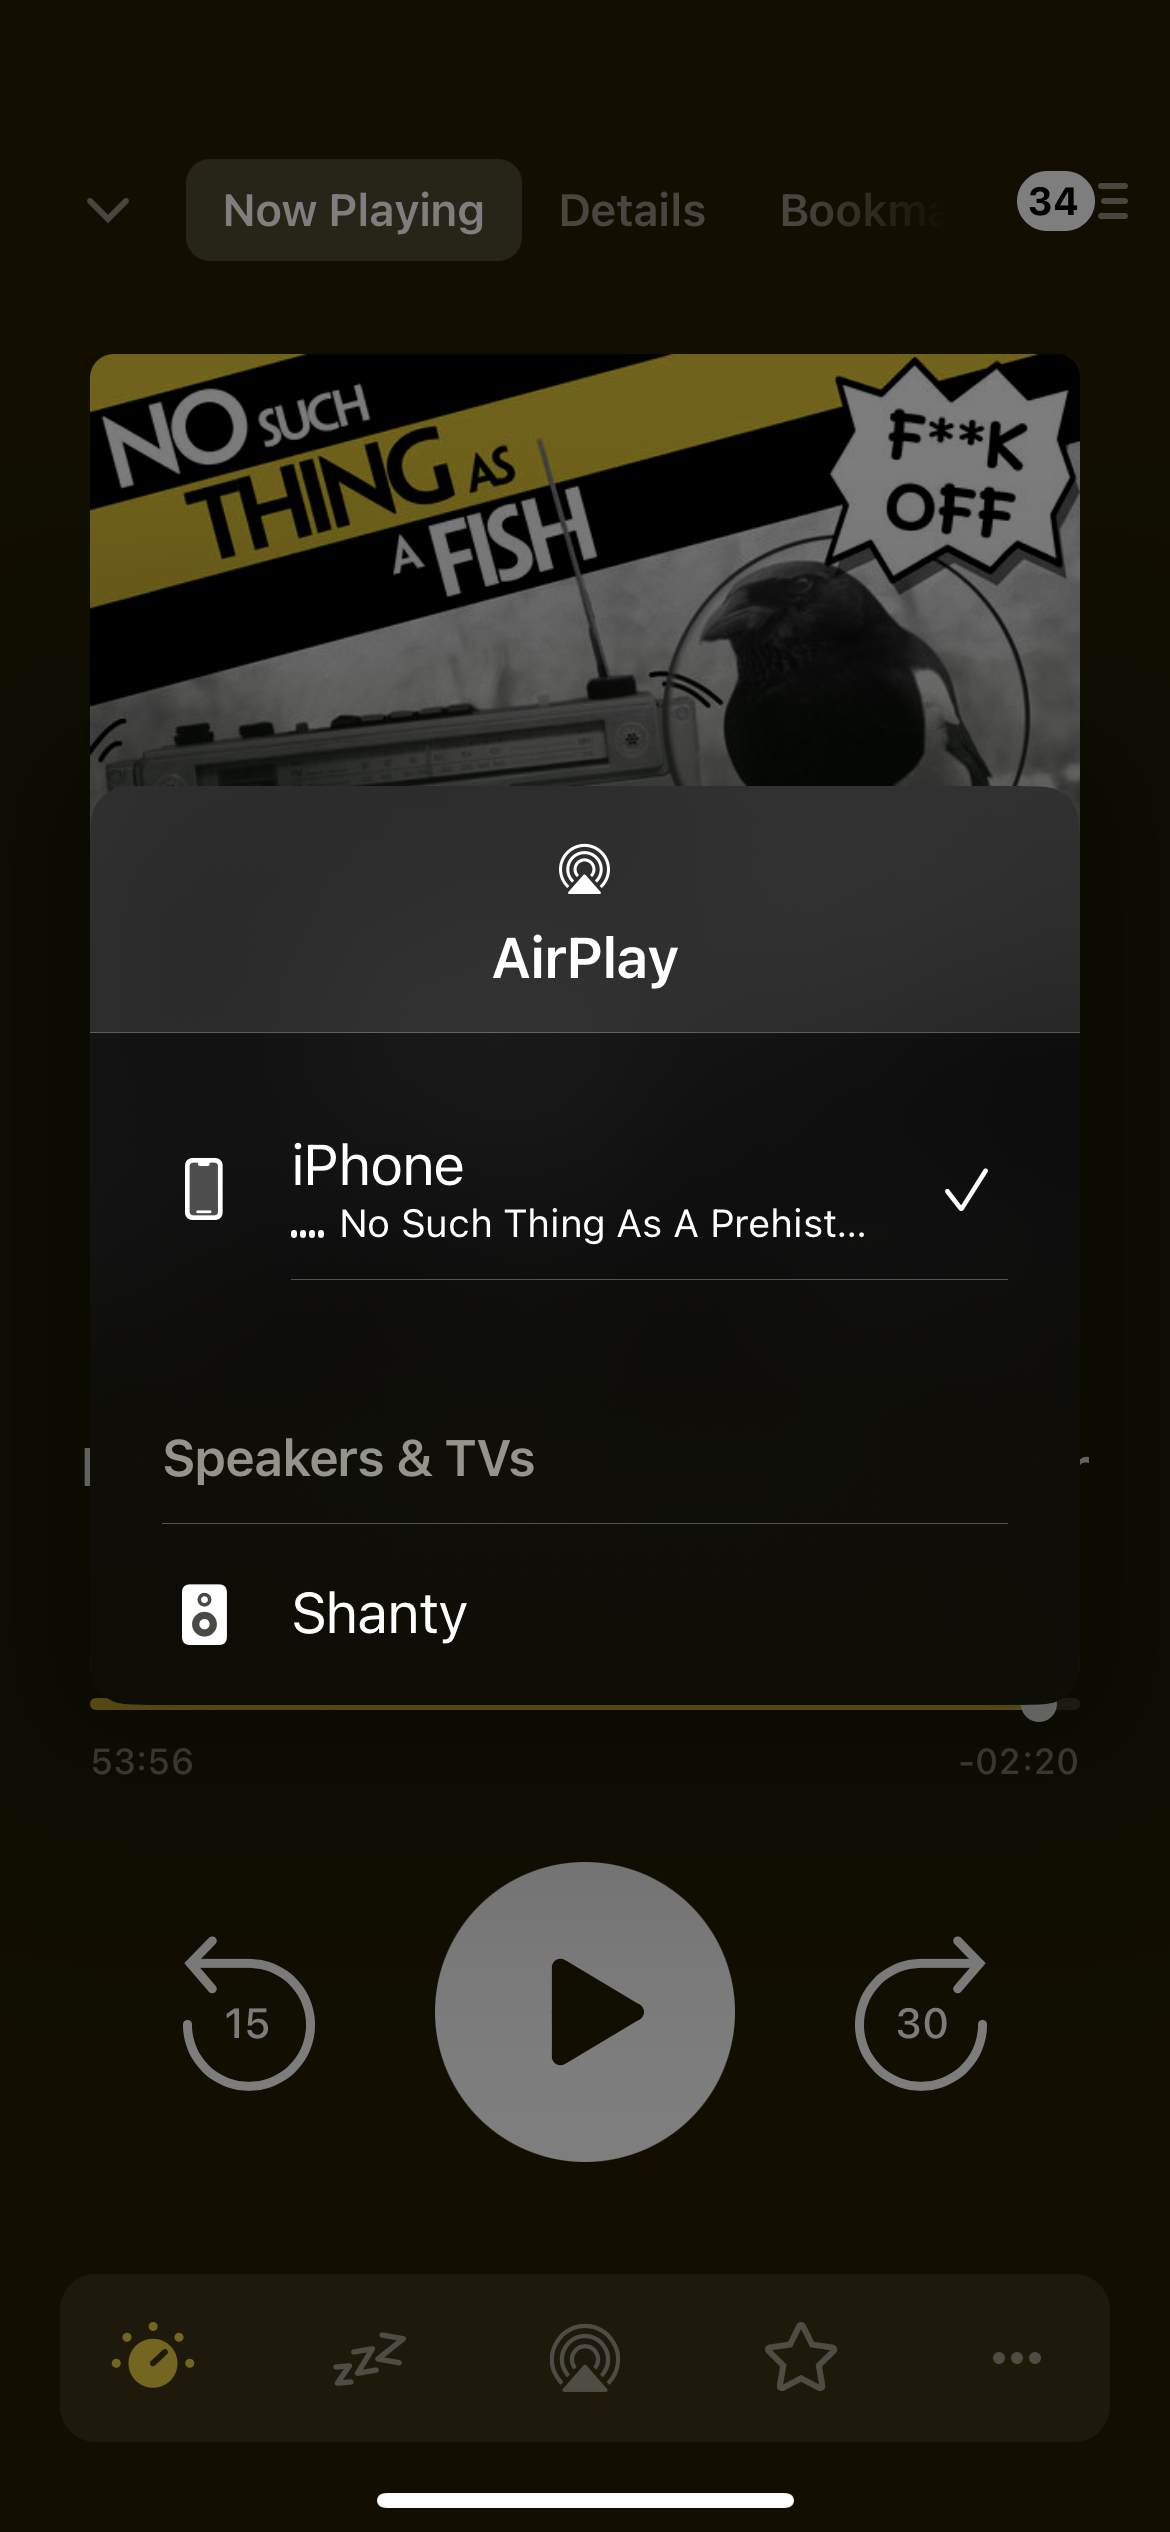 A screenshot from iOS showing the AirPlay menu showing Shanty as a destination under Speakers & TVs